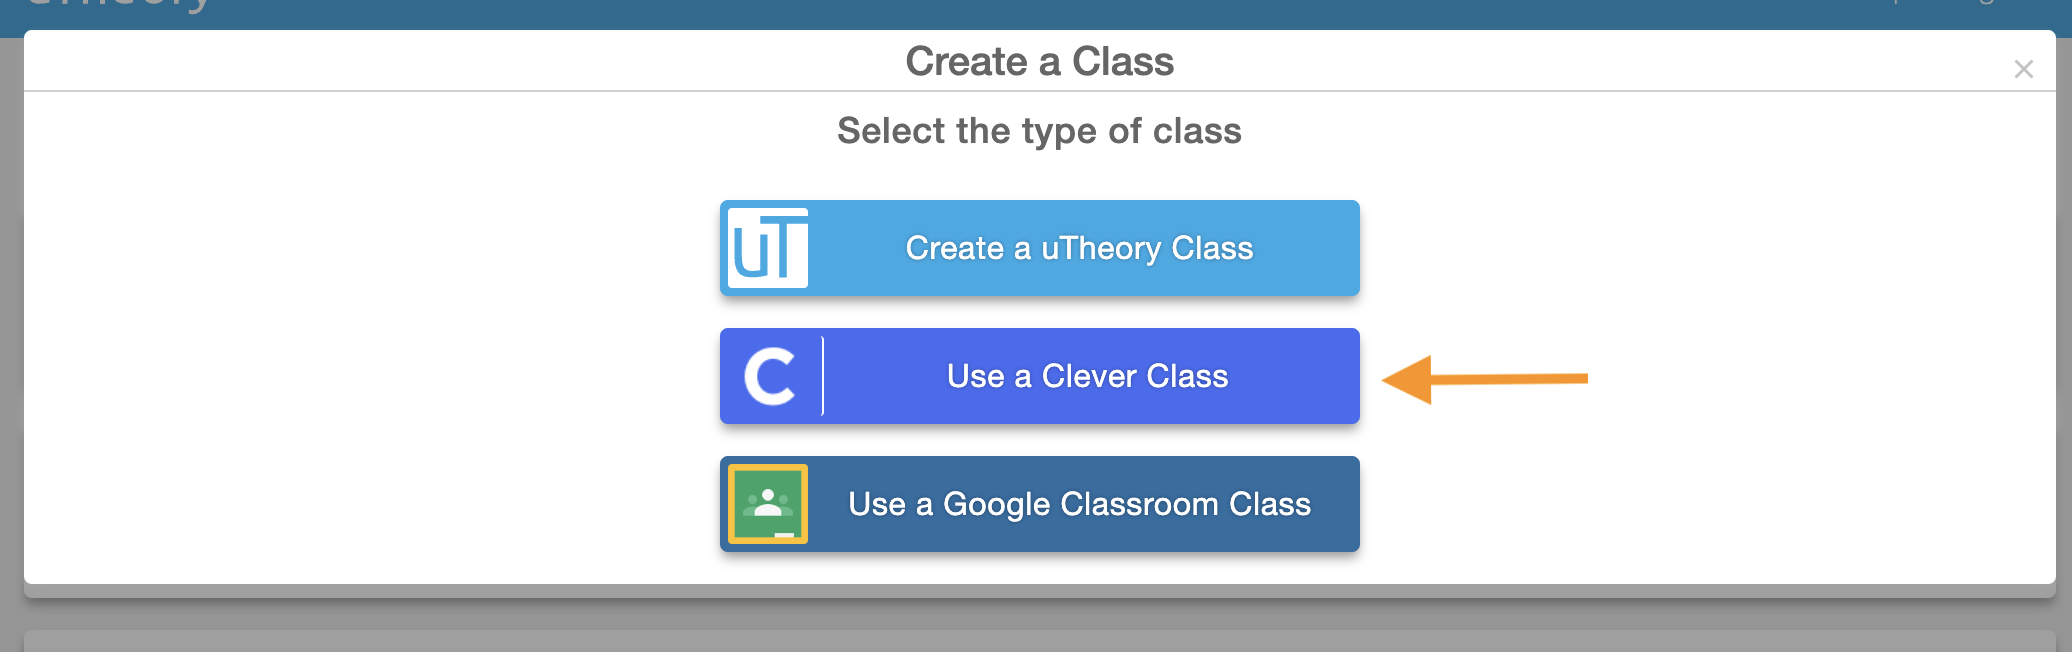 Buttons with types of classes: uTheory Class, Clever Class, and Google Classroom Class